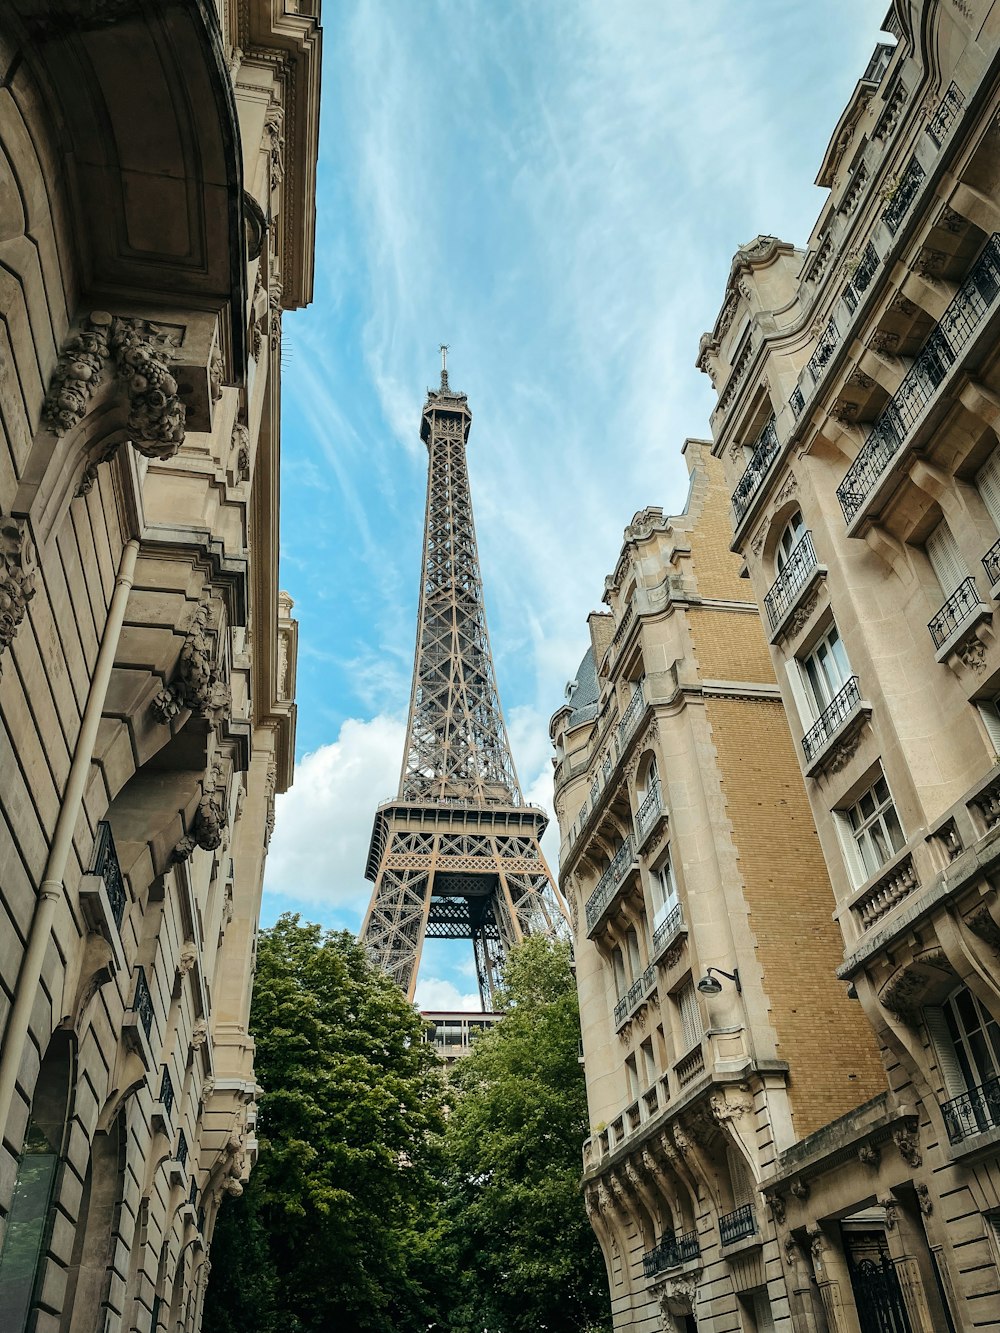 eiffel tower under white clouds and blue sky during daytime